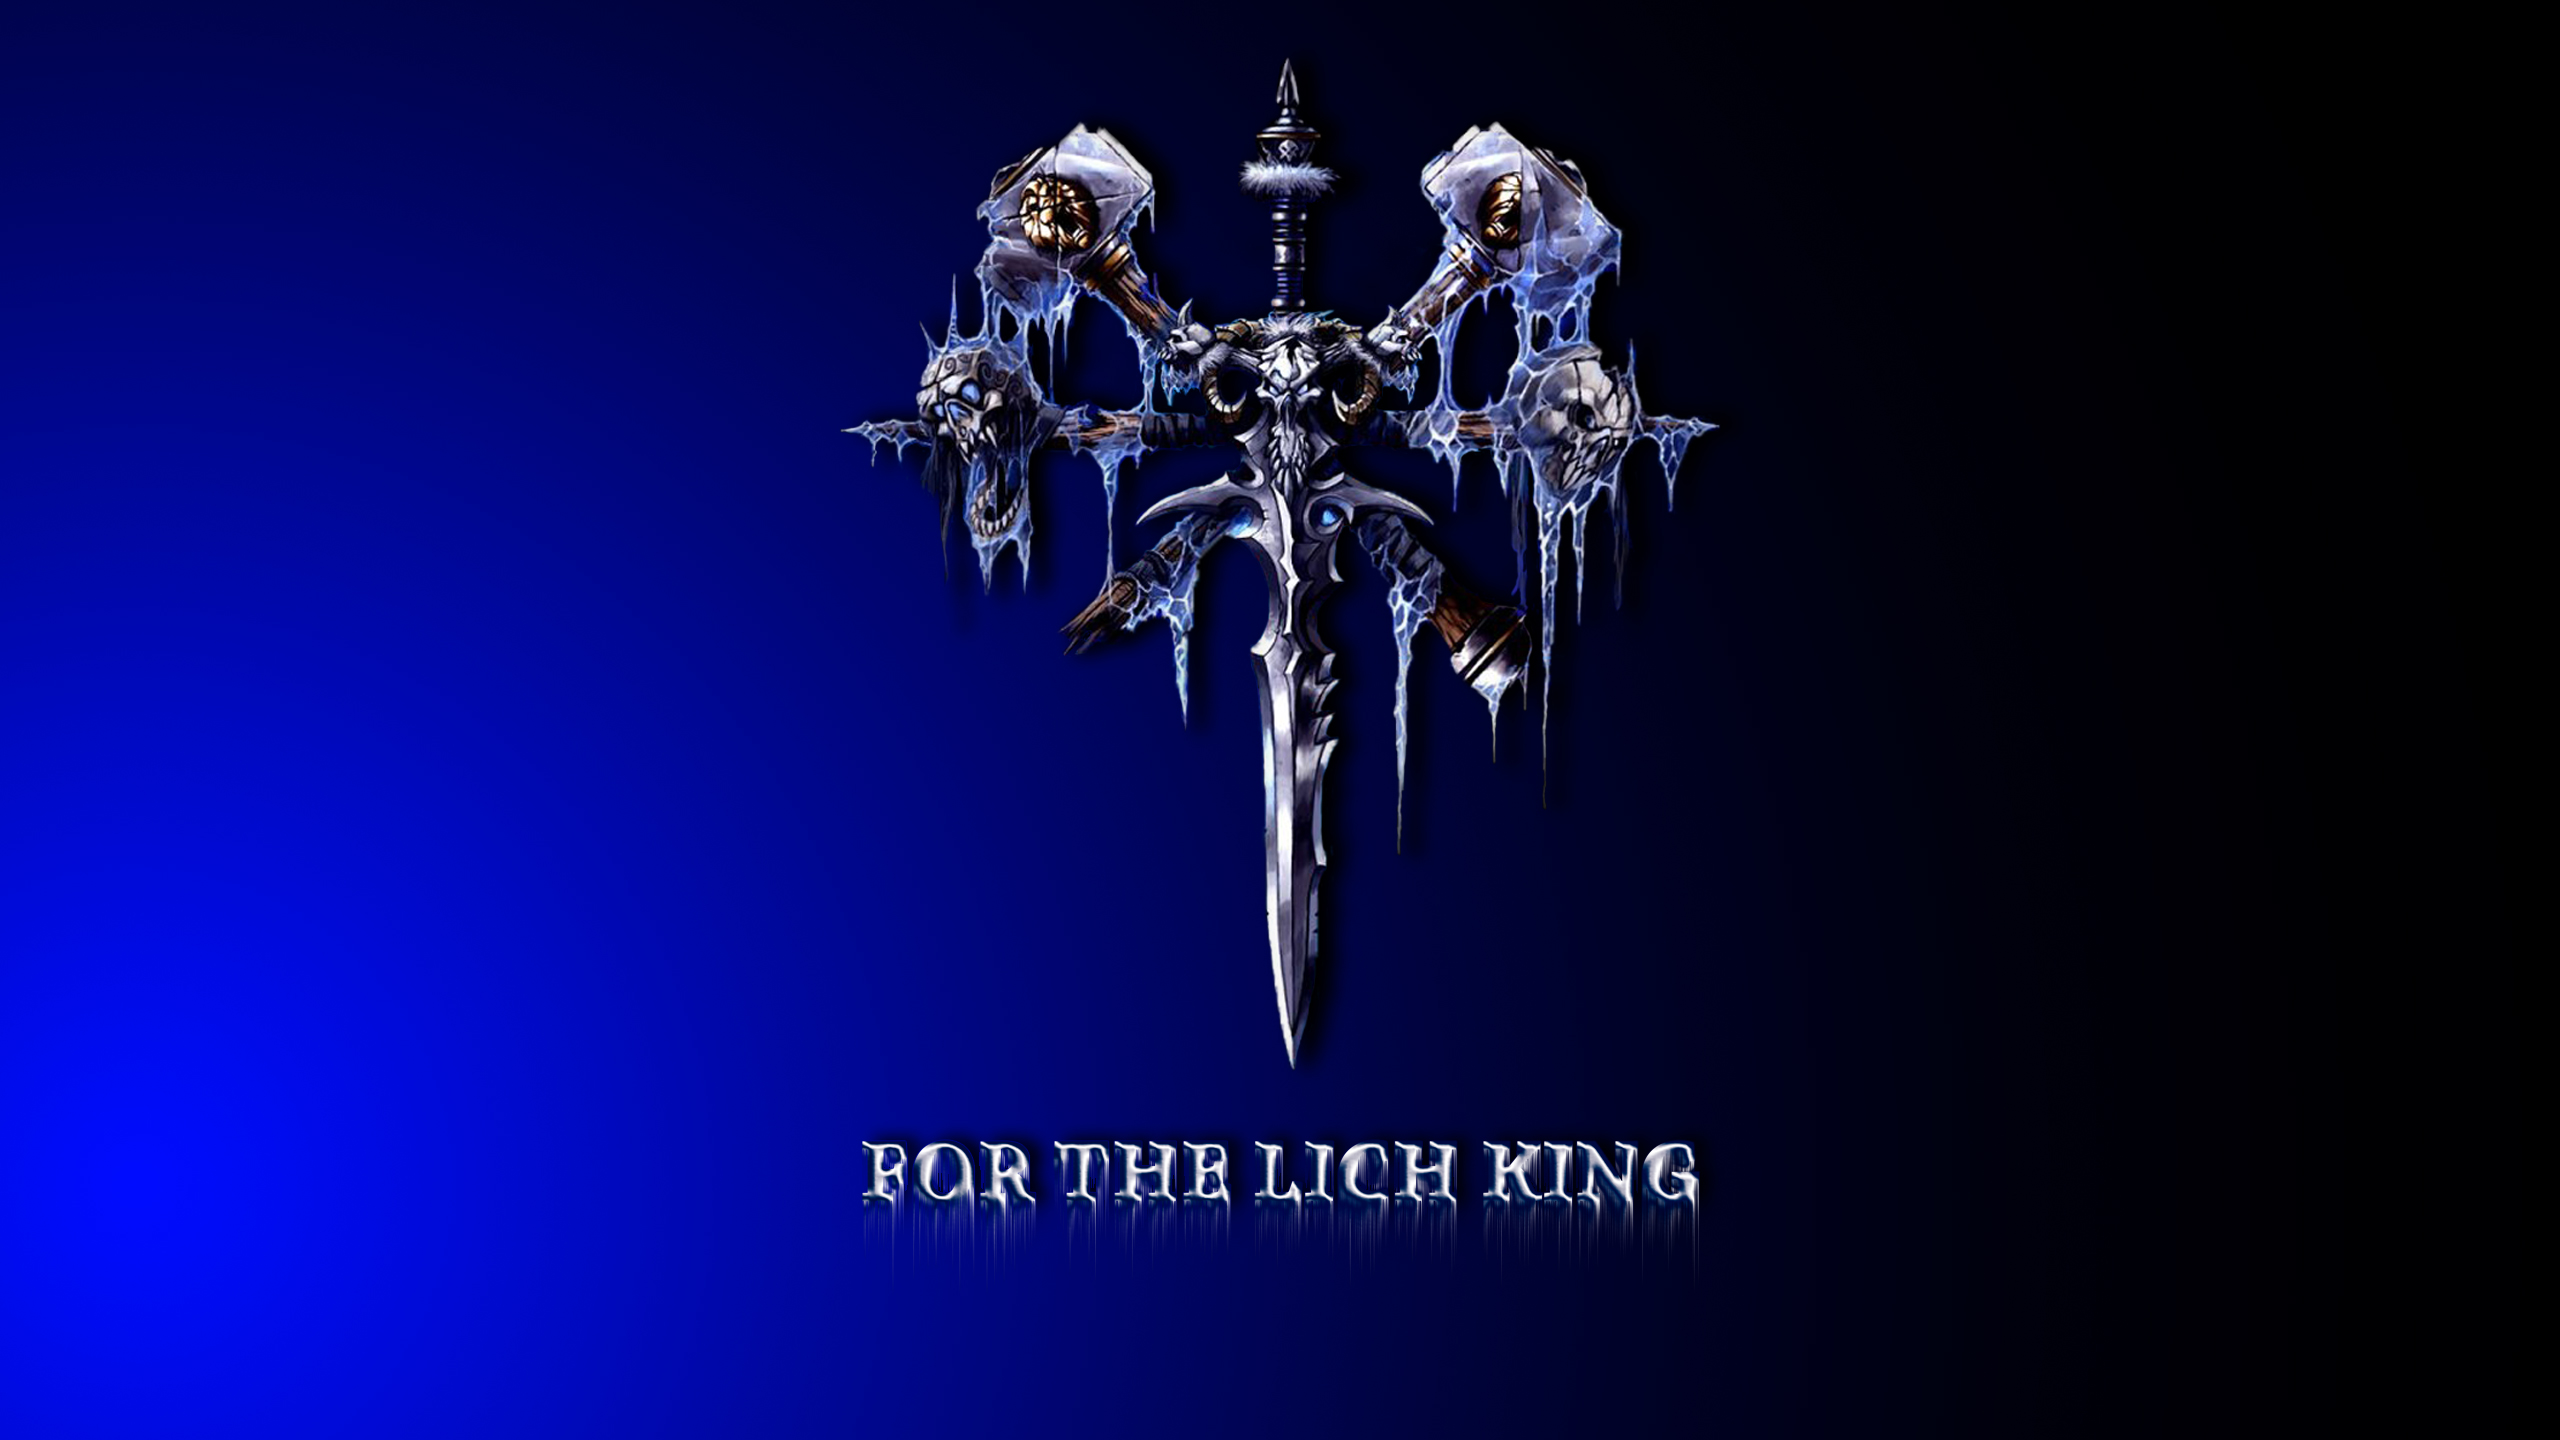 General 2560x1440 Warcraft III Frozen Throne undead video games simple background Blizzard Entertainment Lich King video game characters